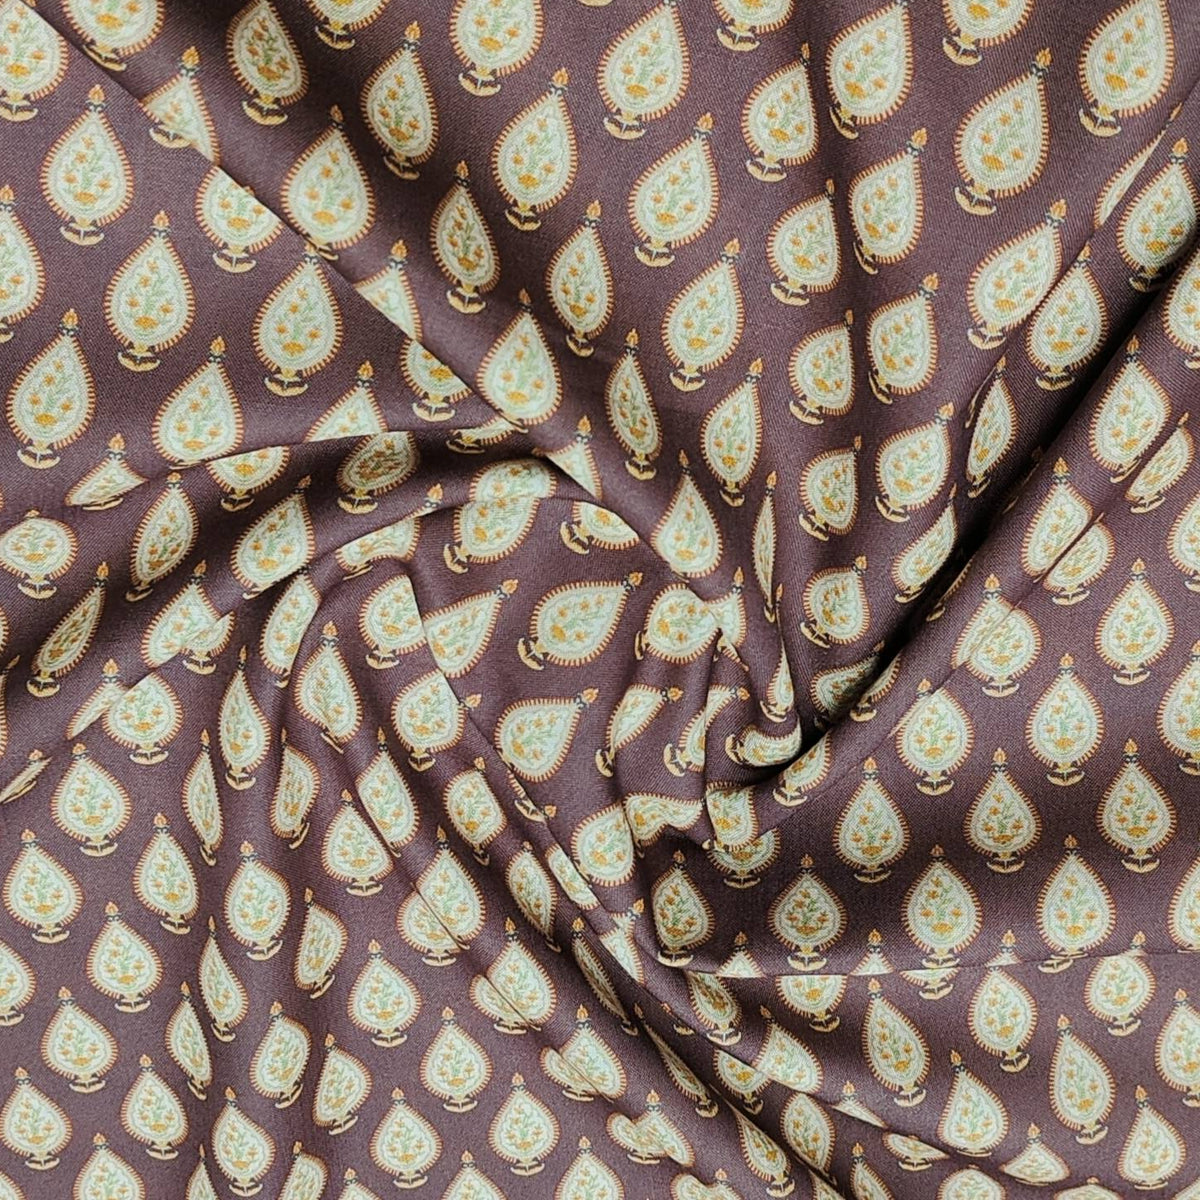 Mantire Special Cotton Blended Floral Fabric for shirt and short Kurta colour Dark Brown